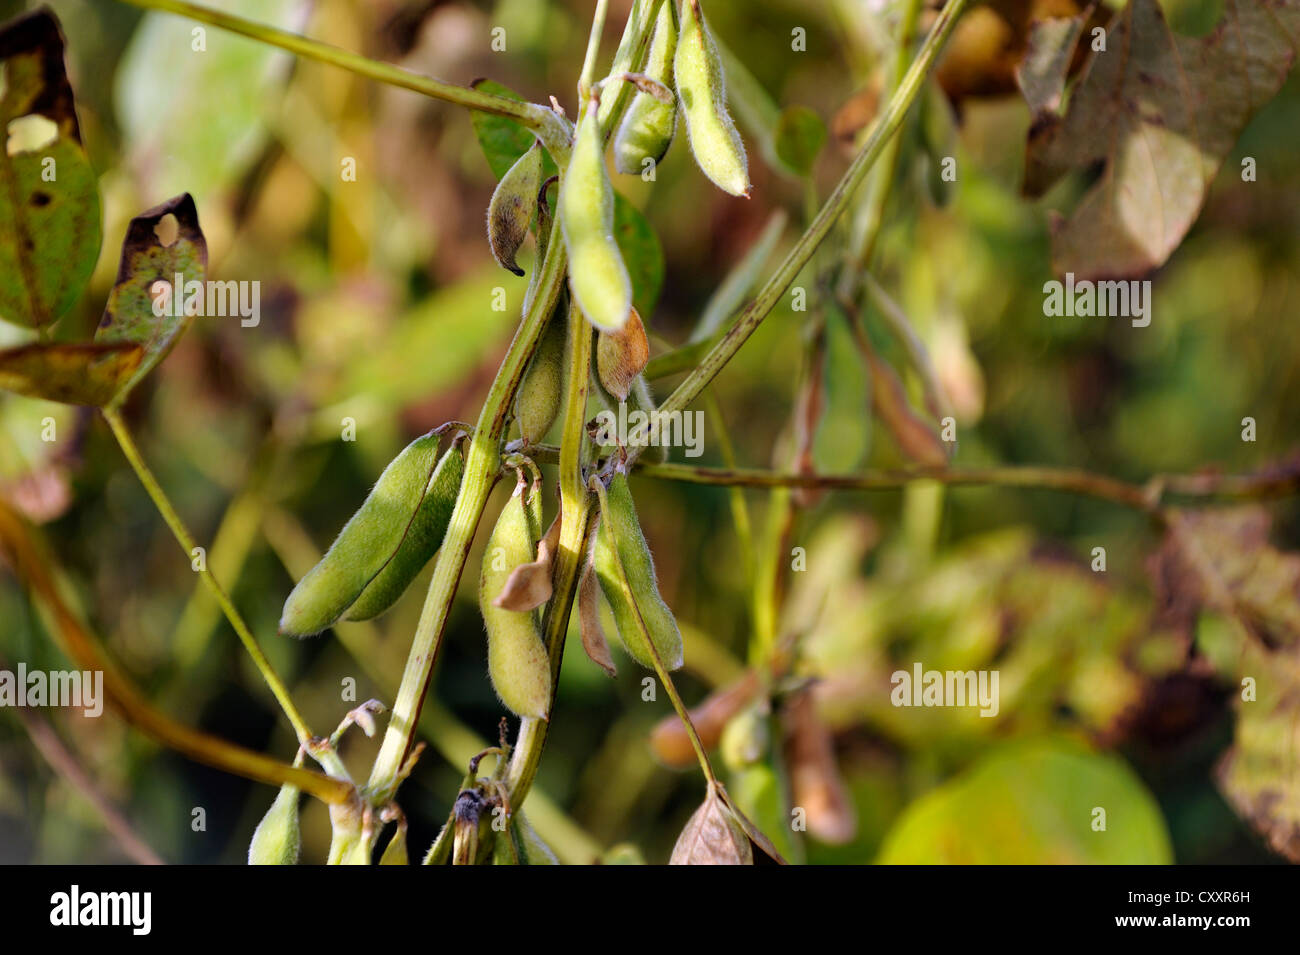 Soybean crop, soybean (Glycine max) with pods, Argentina, South America Stock Photo